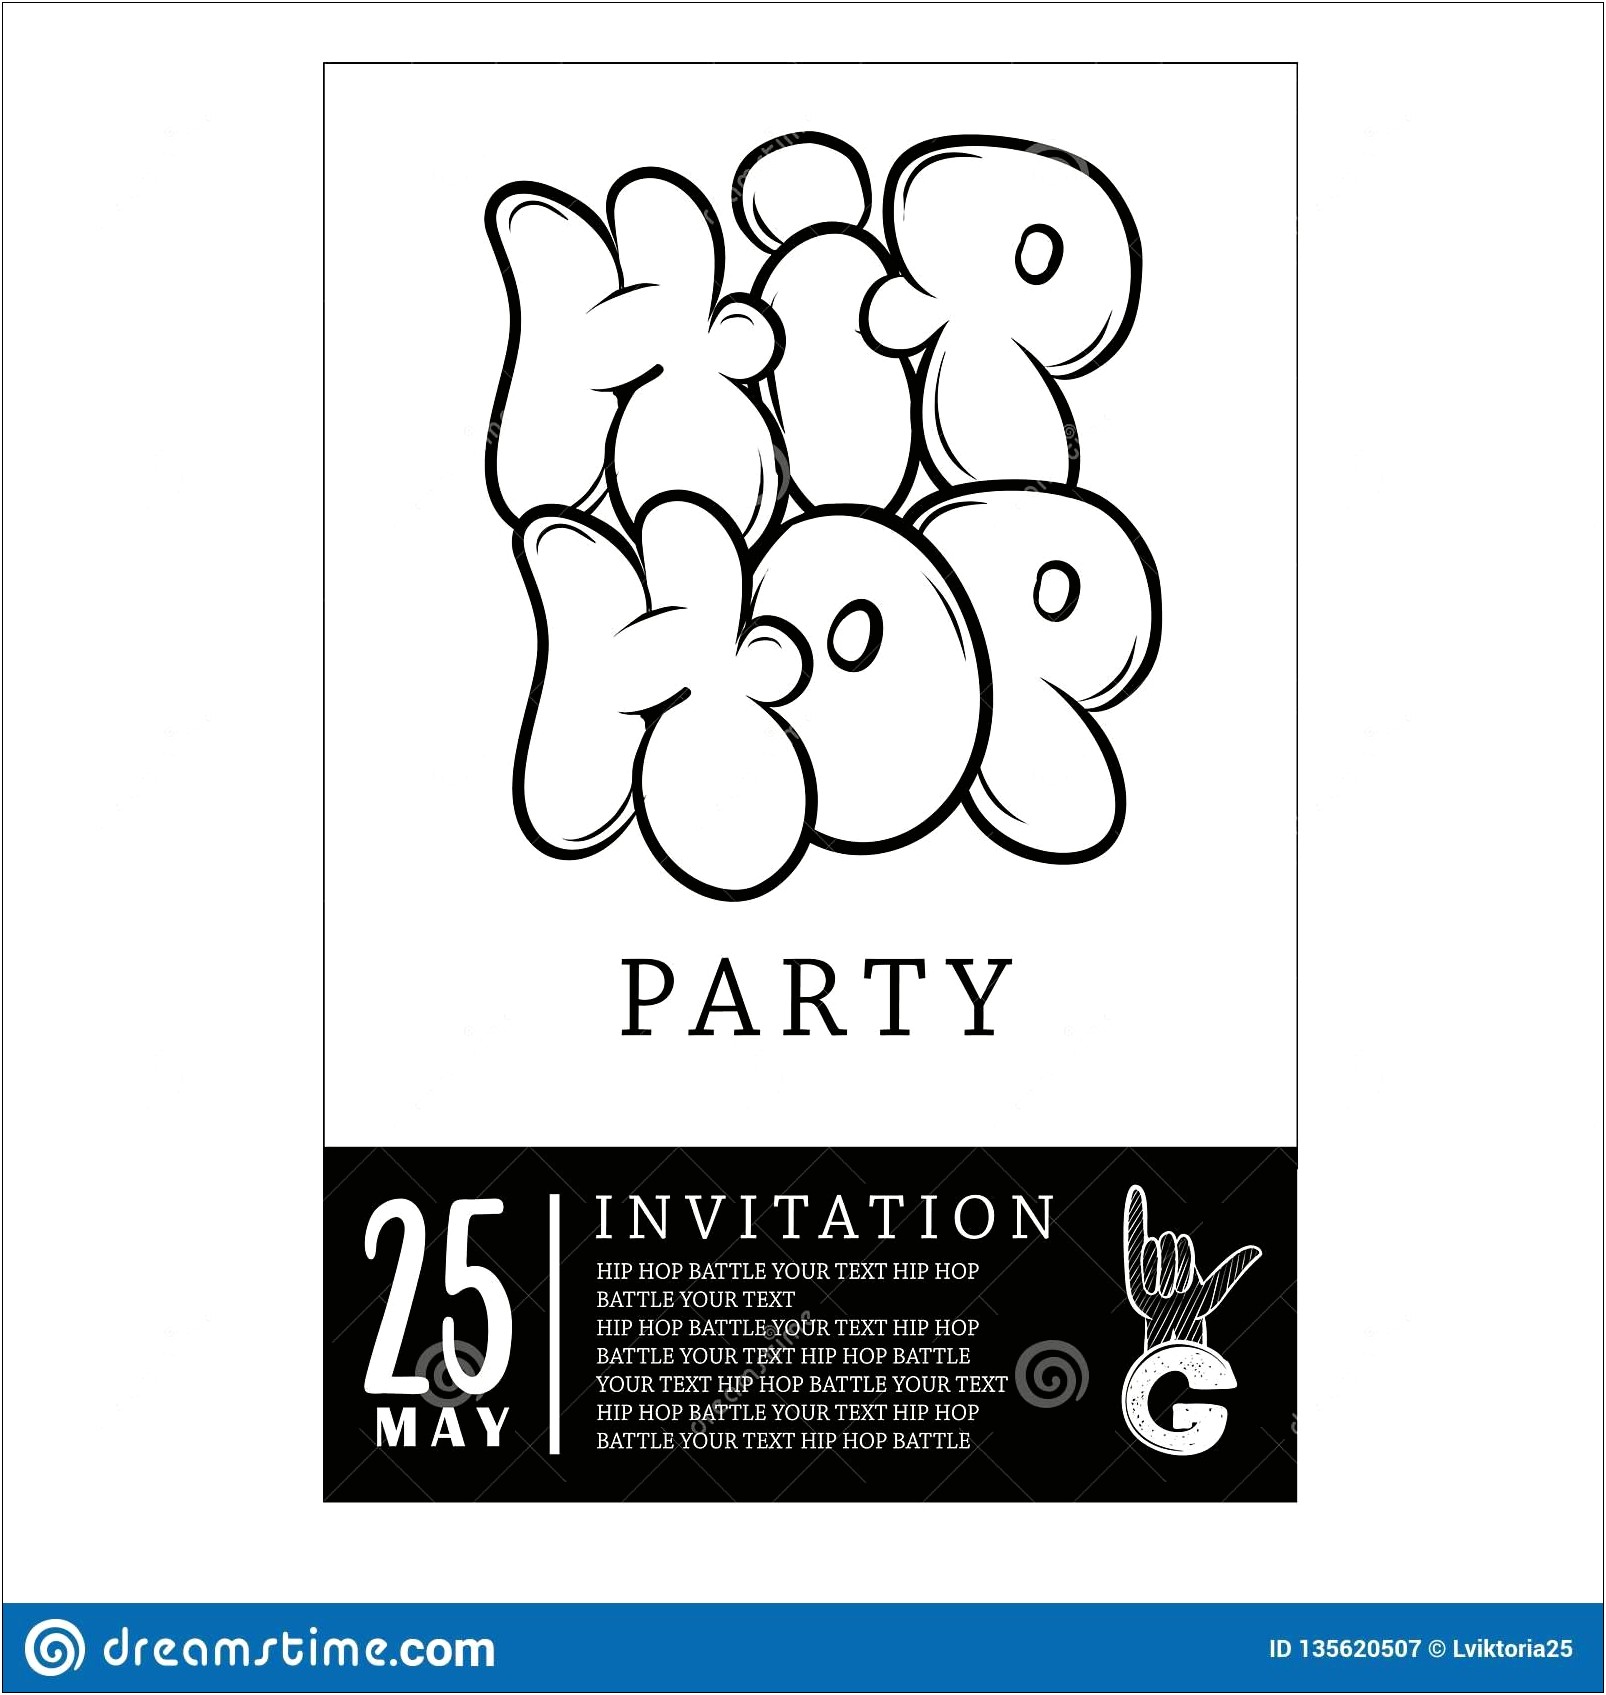 Free Hip Hop Party Flyer Templates